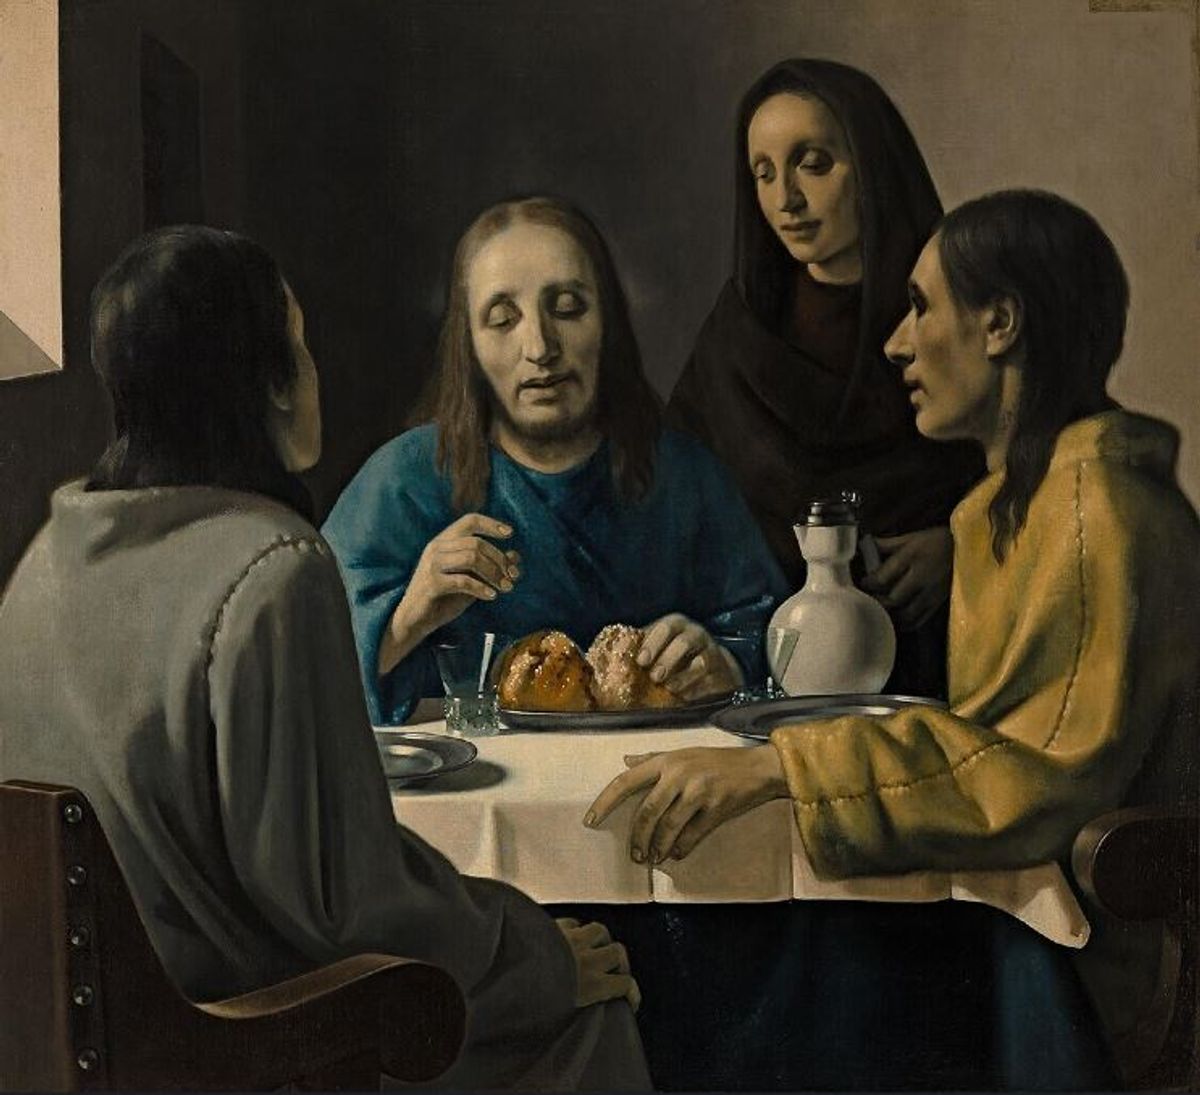 Han van Meegeren's Christ at Emmaus "is the most famous falsification in Dutch art history", according to the Museum Boijmans Van Beuningen's website.  The museum bought the "Vermeer" in 1937 and only learned it was a fake after Second World War Museum Boijmans Van Beuningen